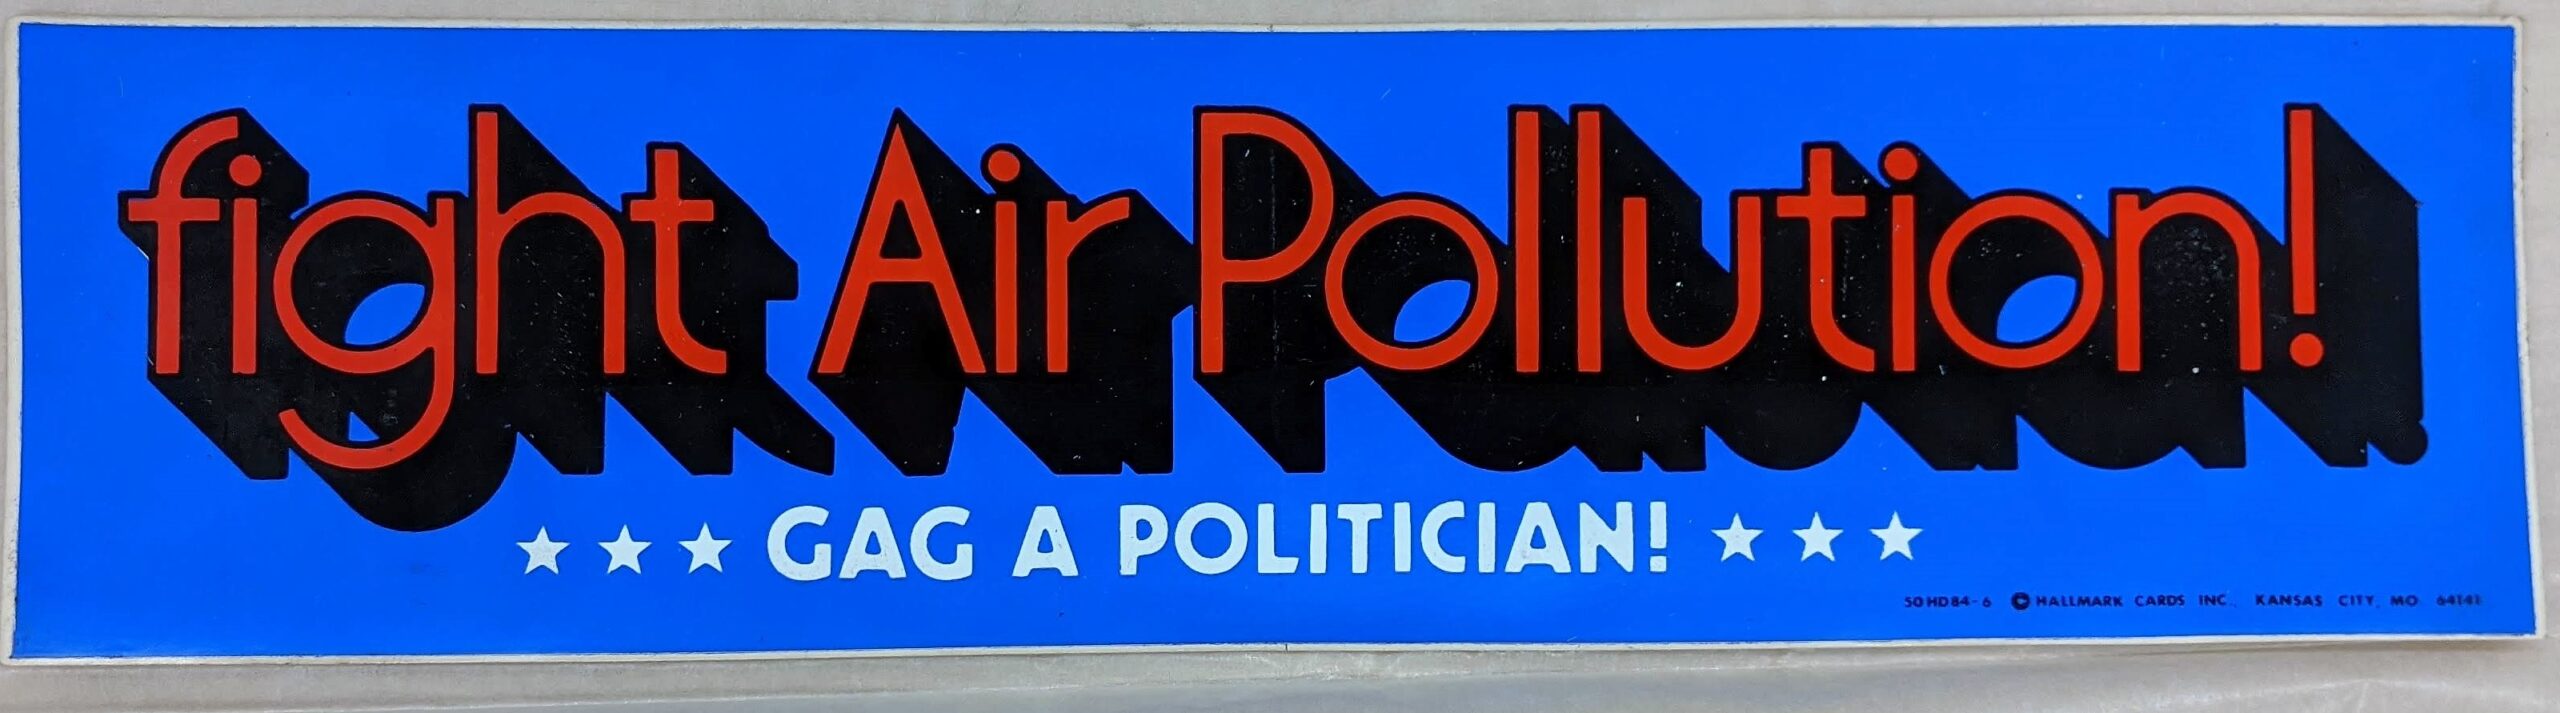 Creator unknown, “fight Air Pollution, gag a politician” bumper sticker, from the Jerome O. Herlihy political campaign ephemera collection